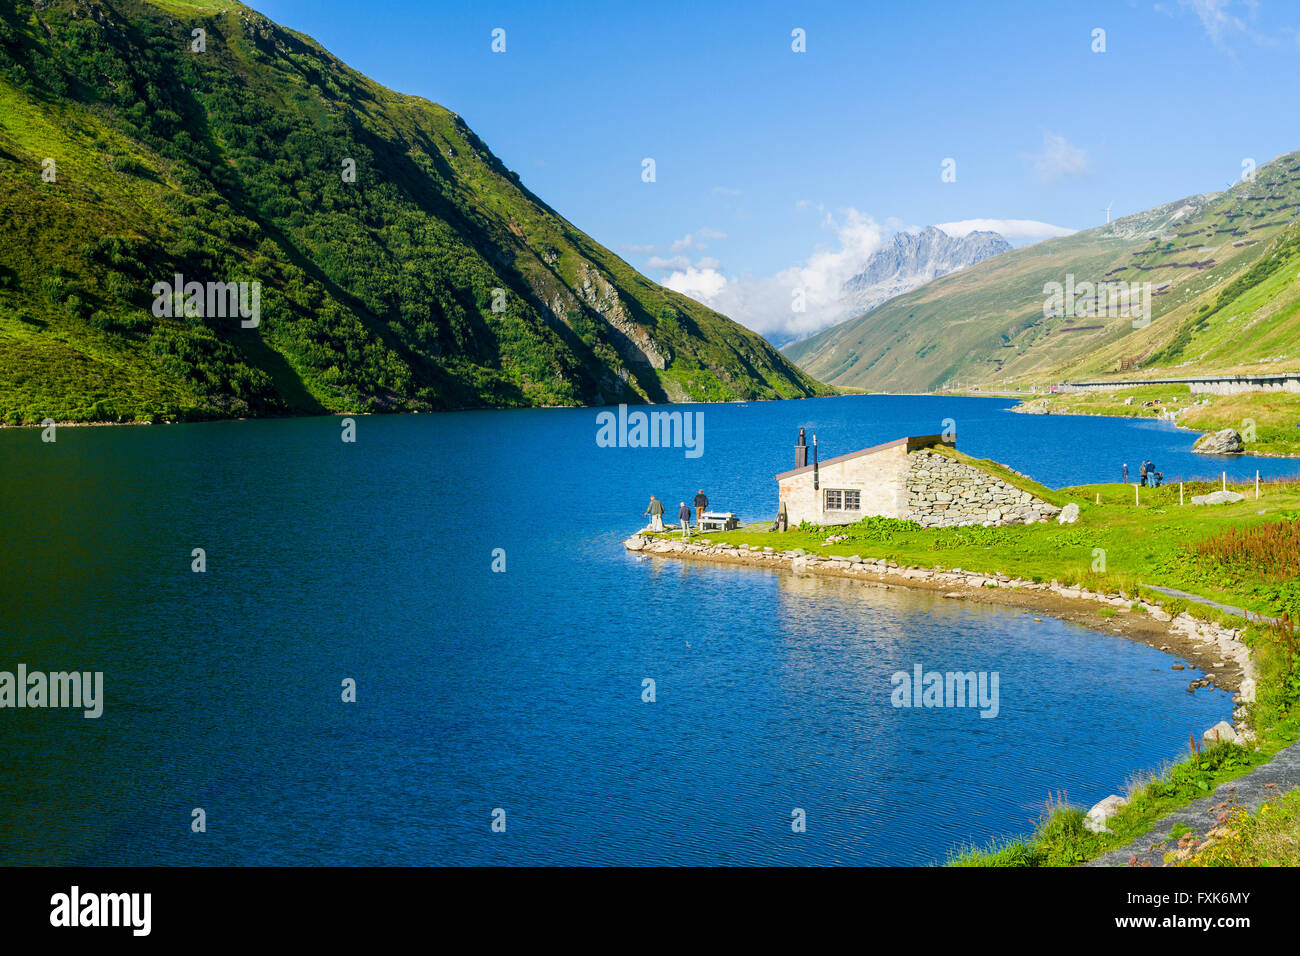 Landscape with mountains and the lake of a high altitude hydroelectric power plant, Oberalp Pass, Andermatt, Uri, Switzerland Stock Photo